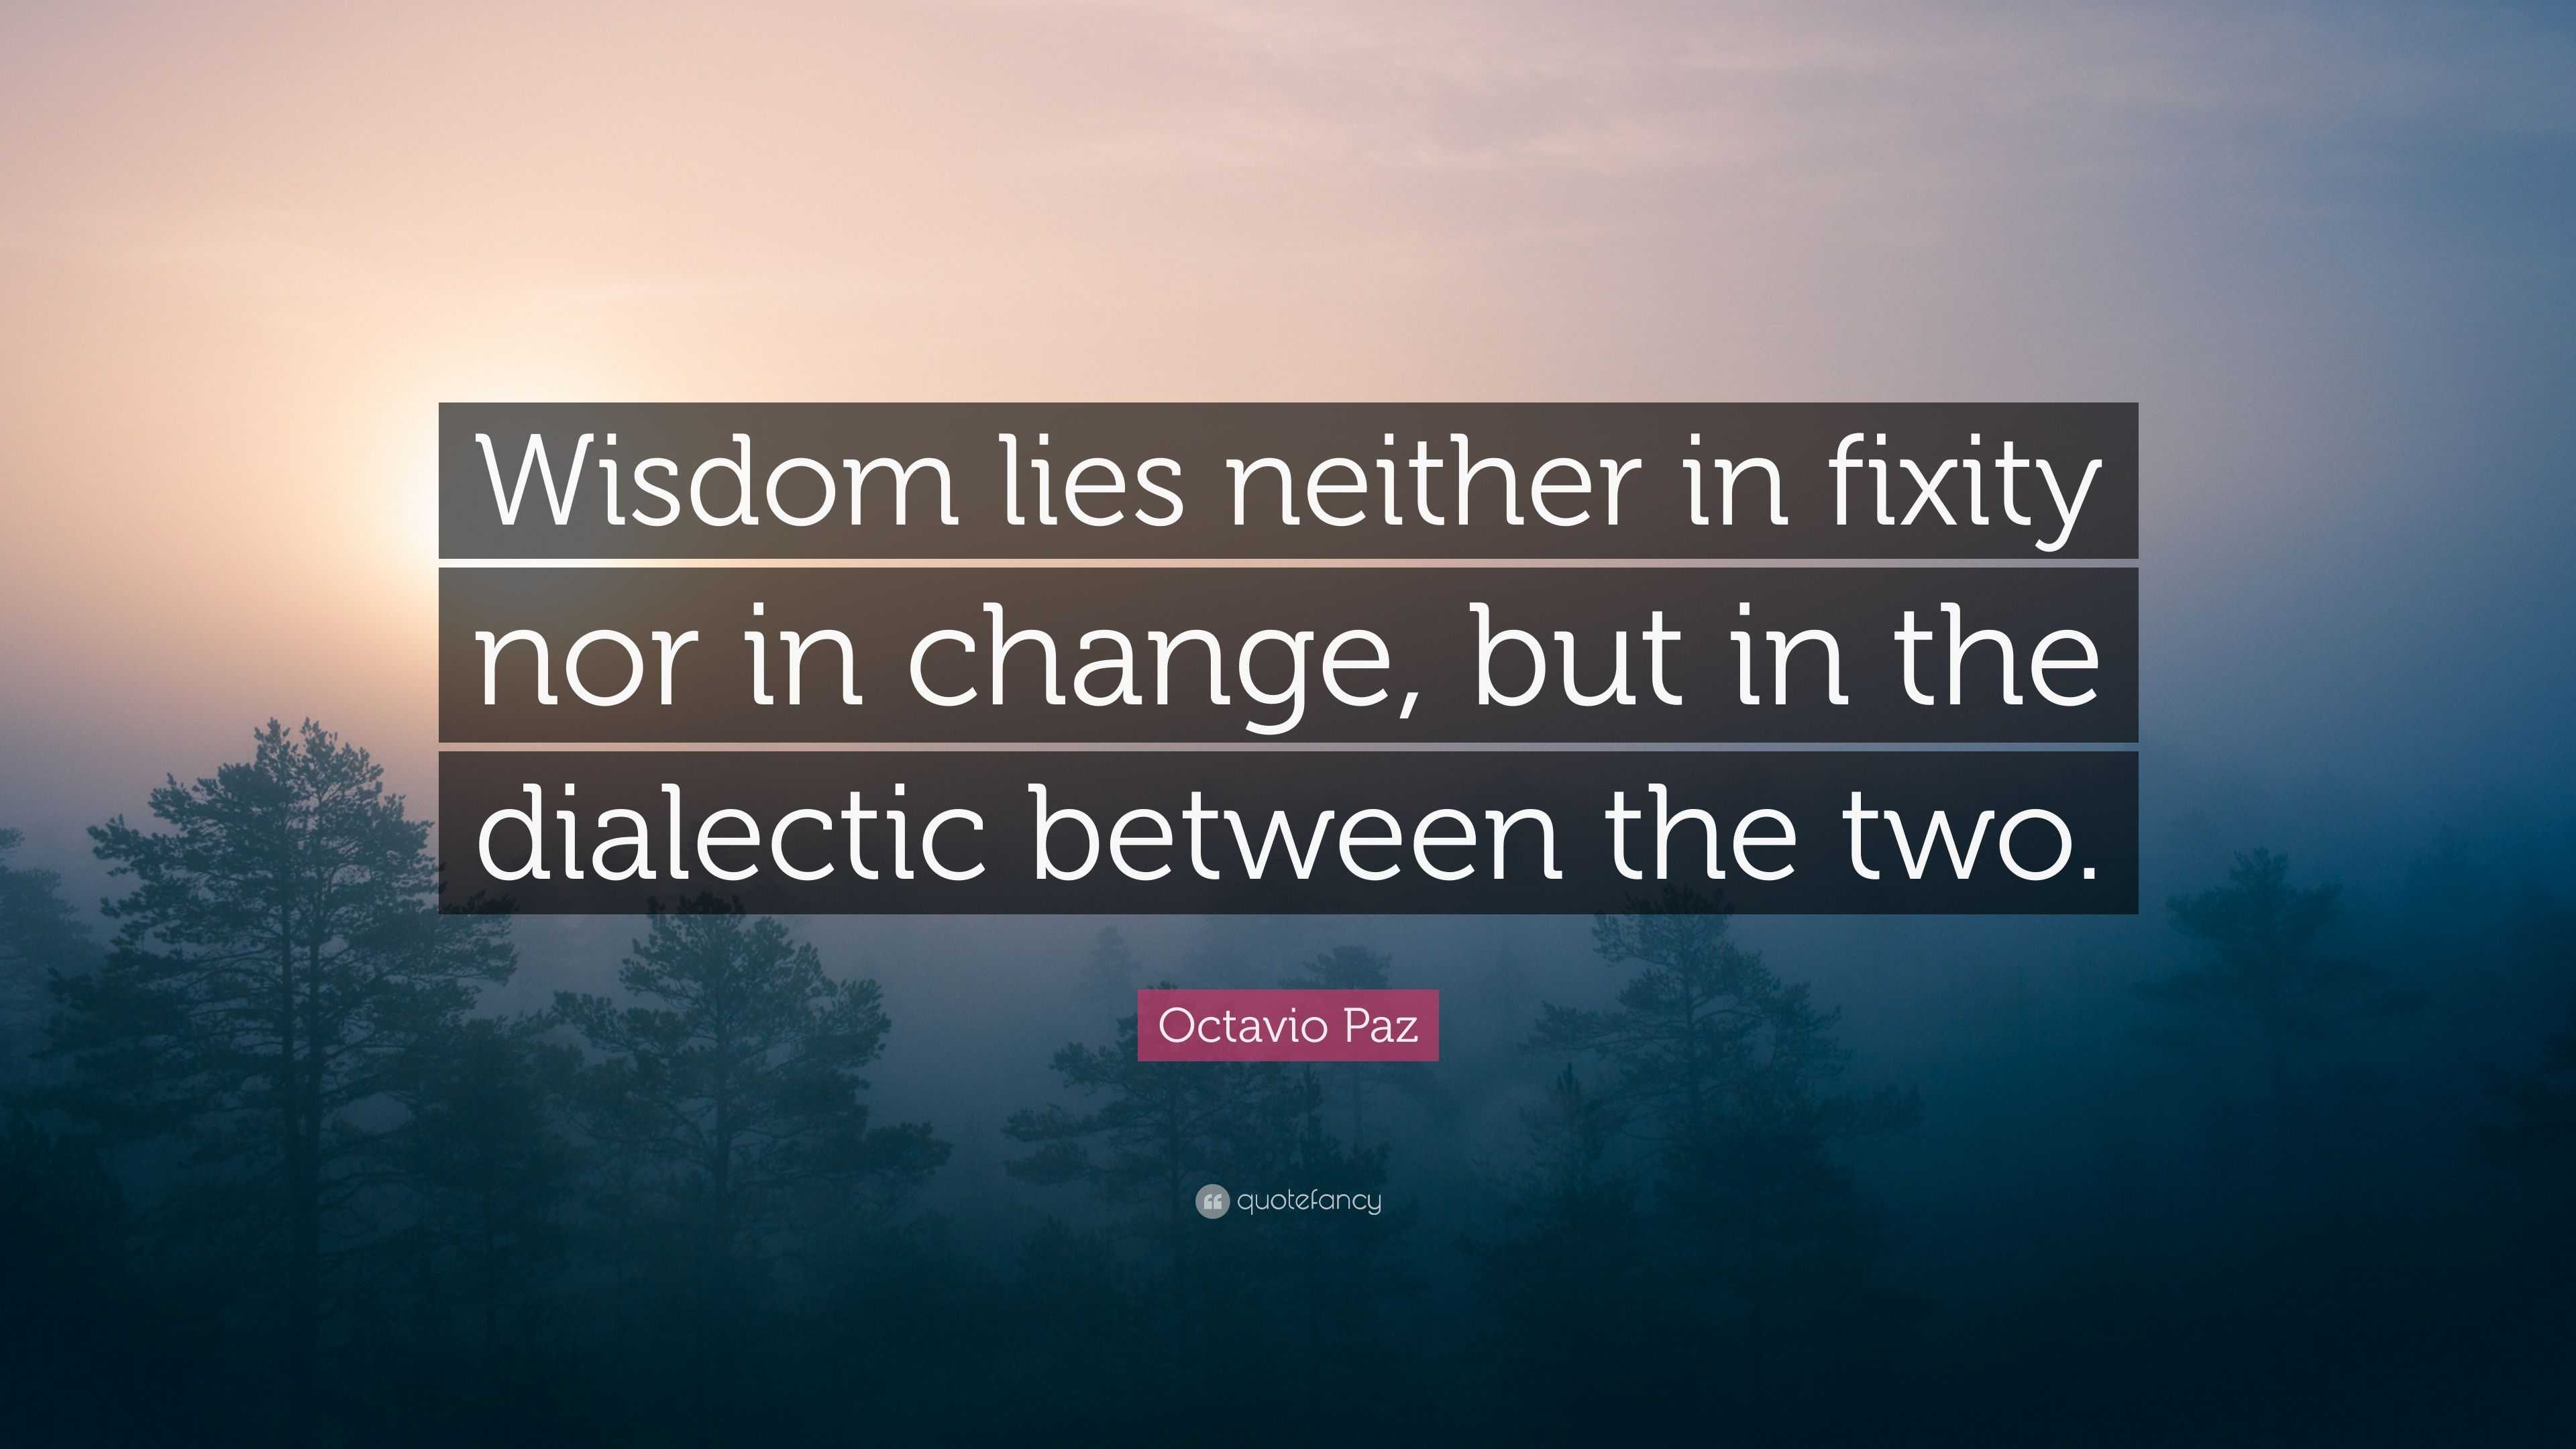 Octavio Paz Quote: “Wisdom lies neither in fixity nor in change, but in ...